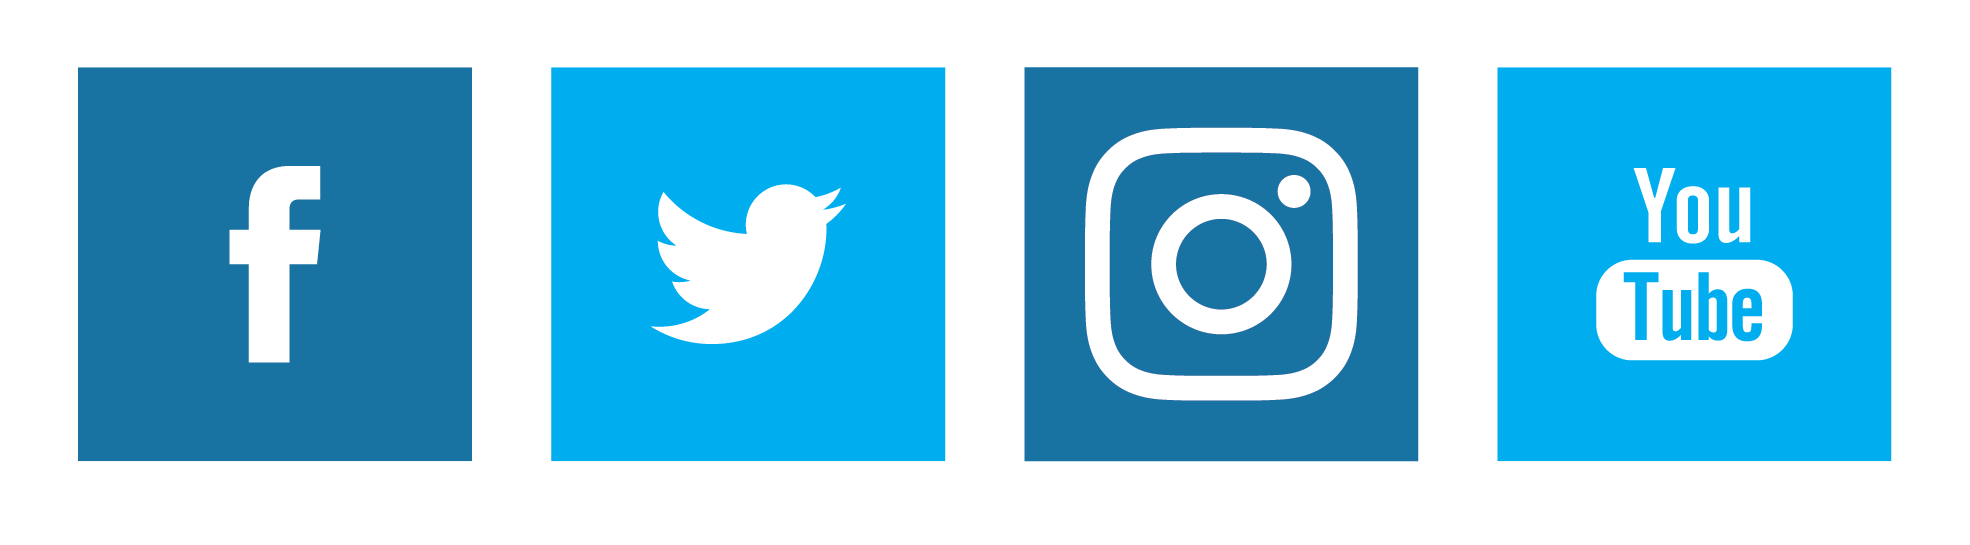 Blue social media icons for Facebook, Twitter, Instagram, and YouTube.